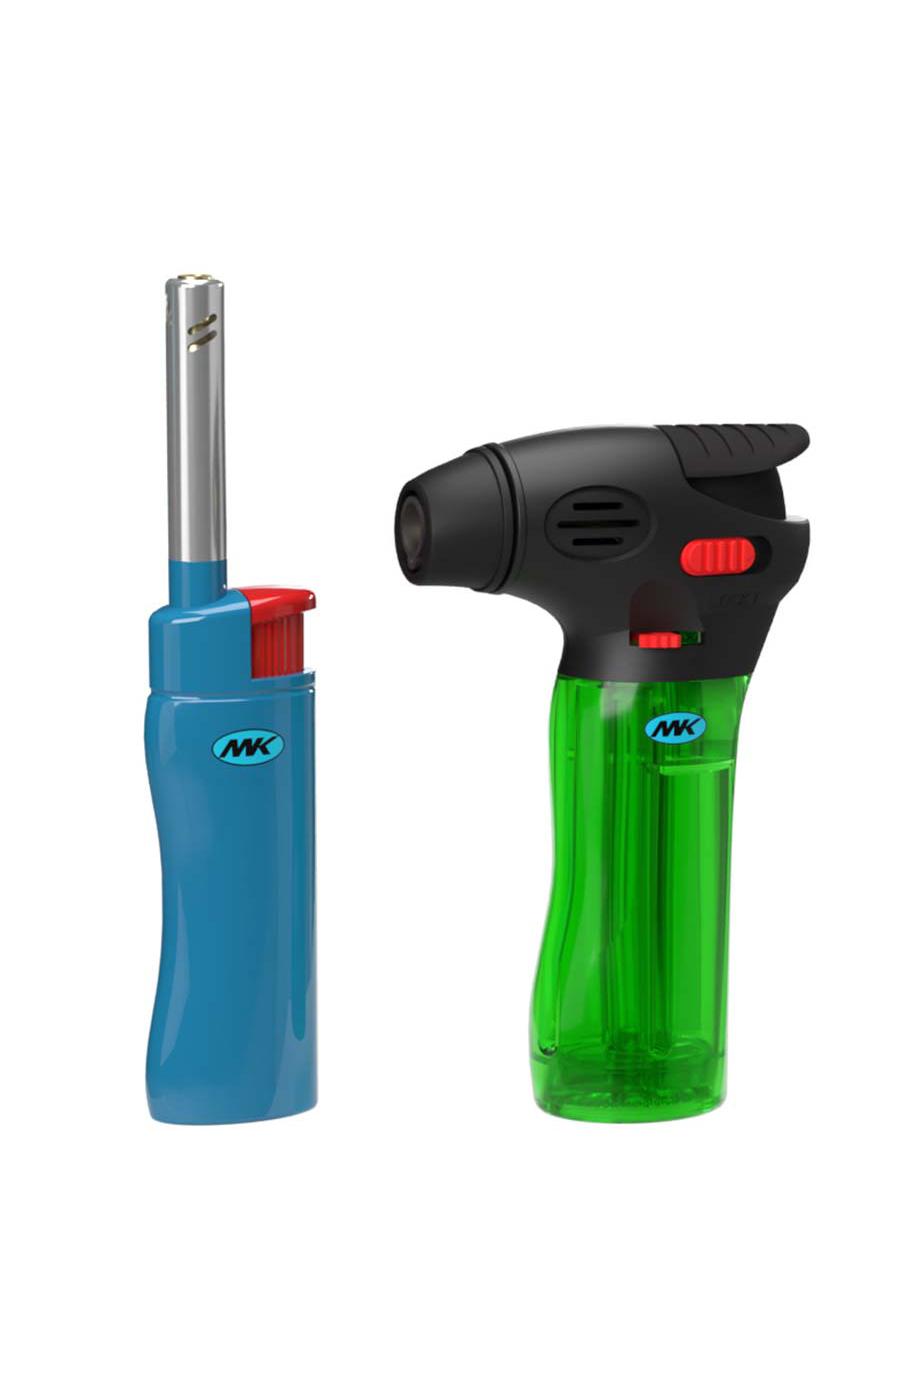 MK Lighter Torch & Click Combo Lighters; image 1 of 2